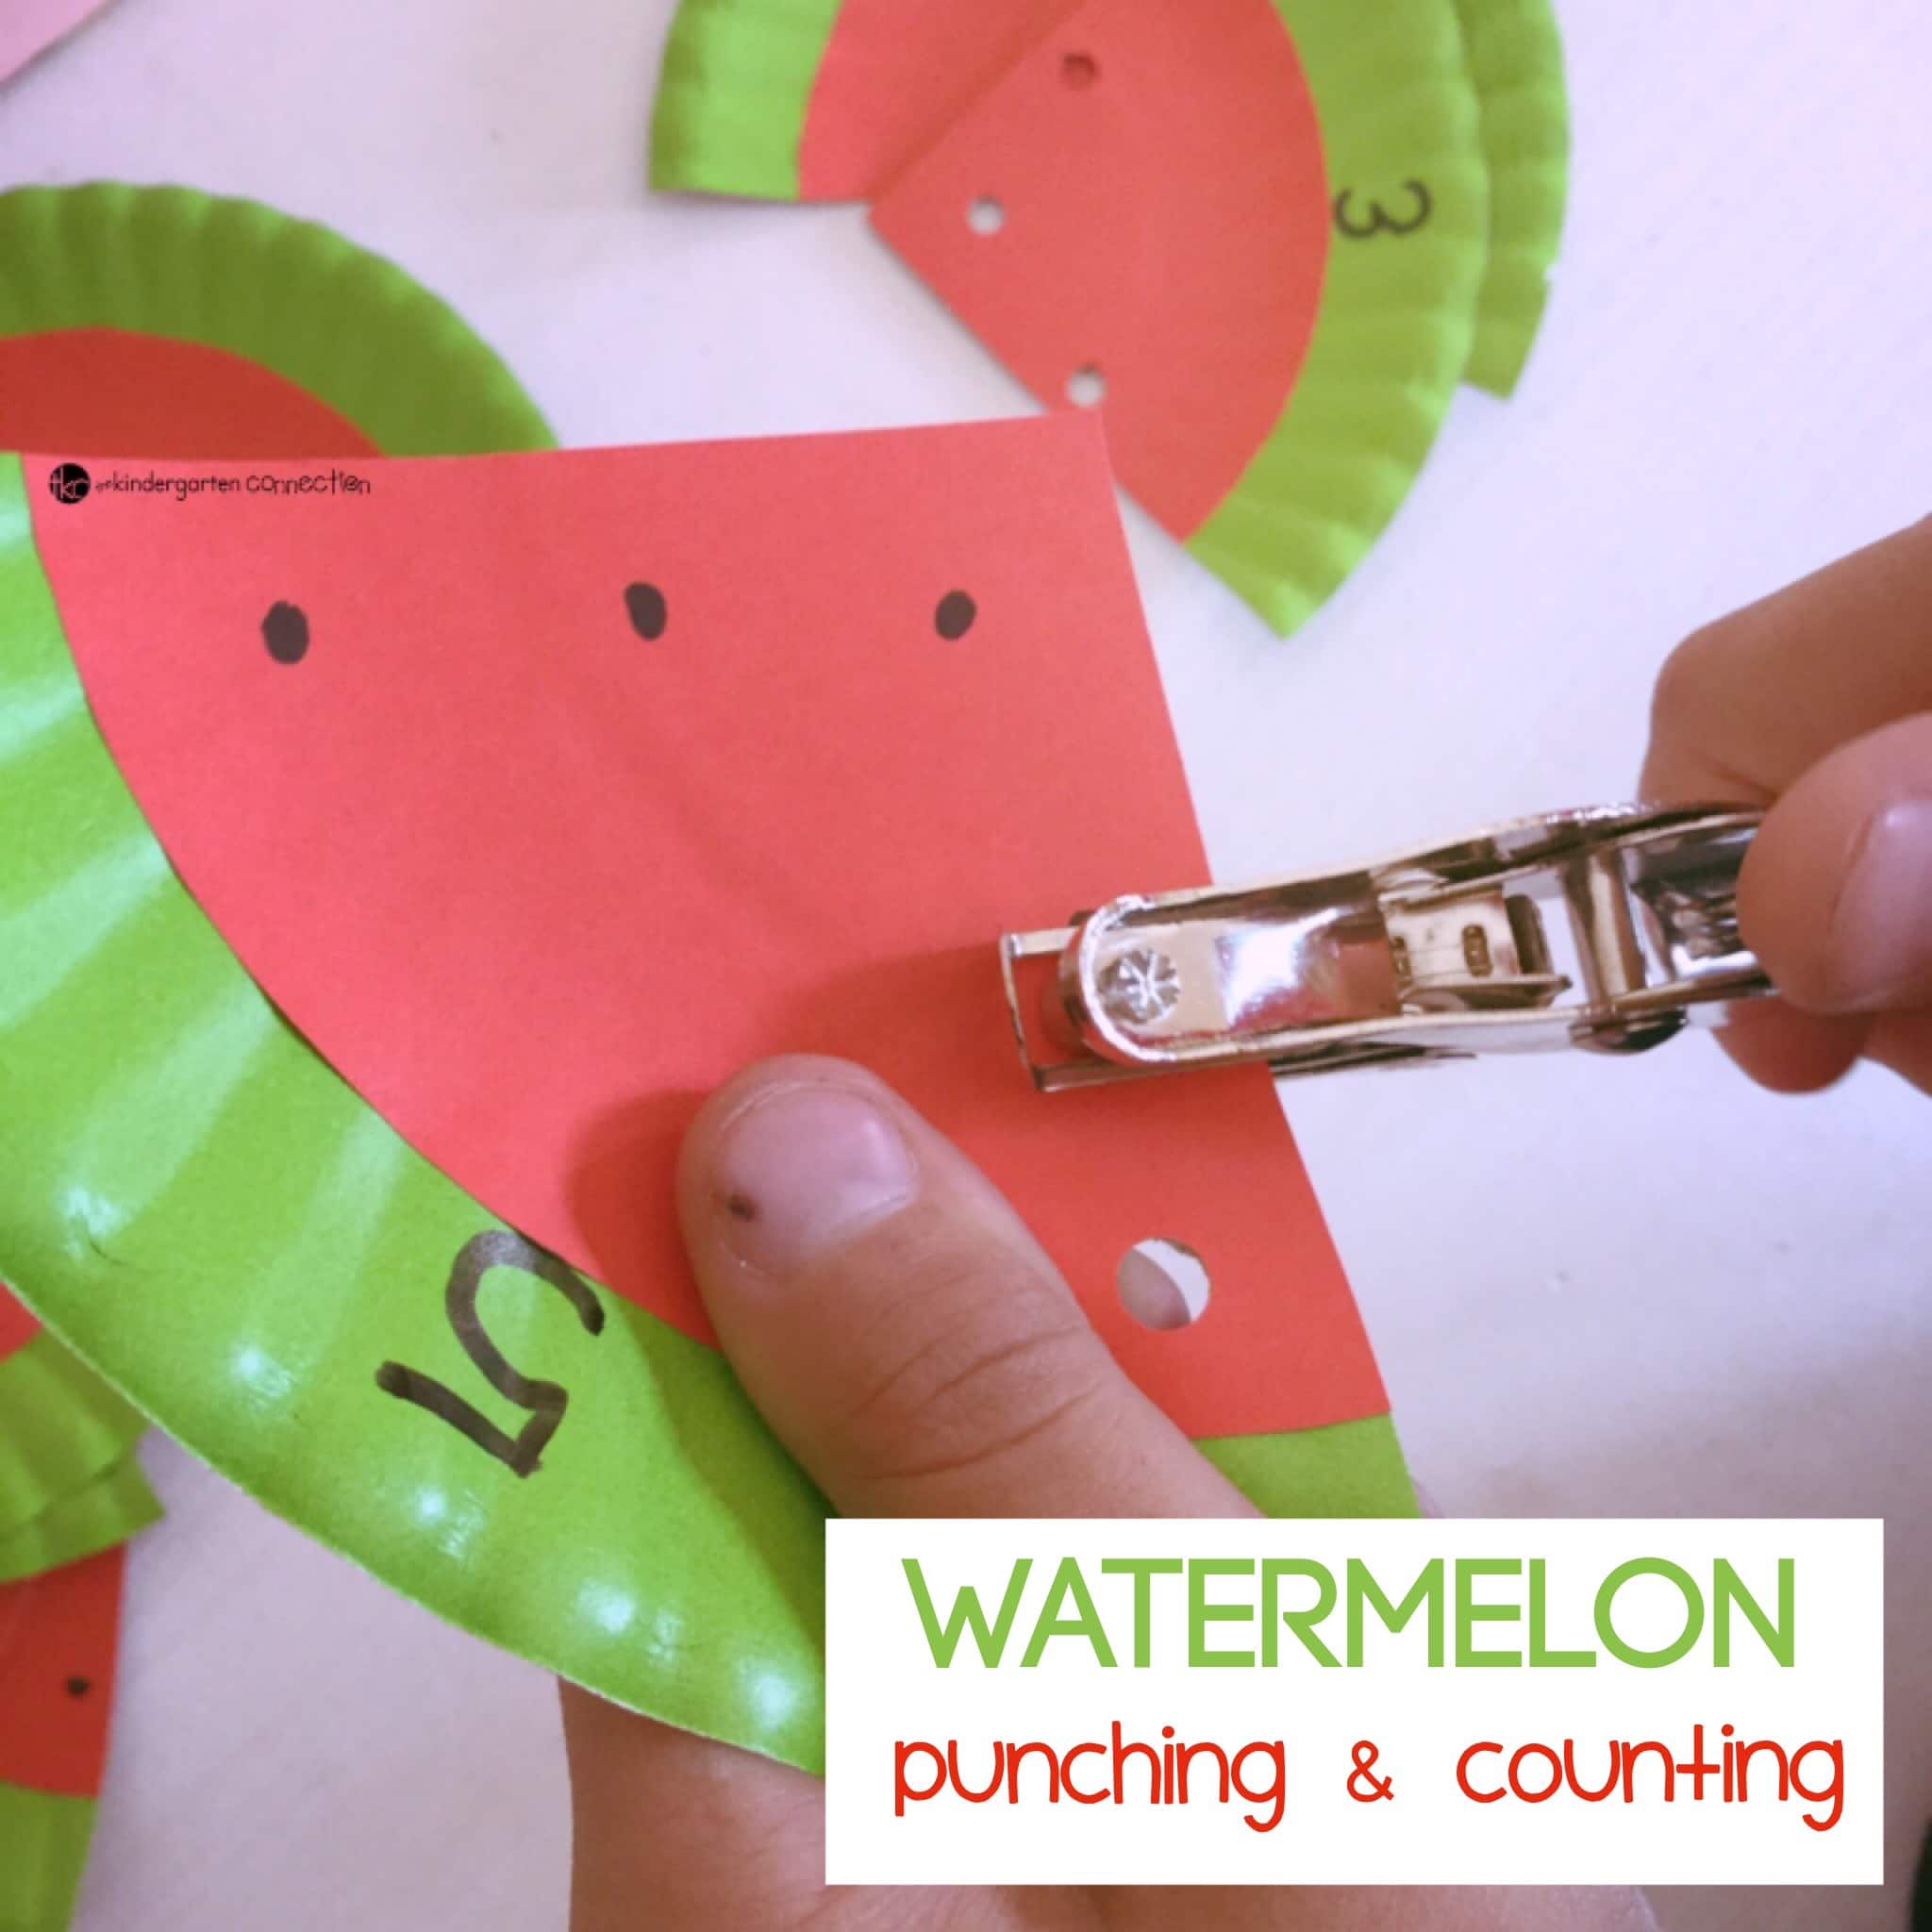 Make these fun watermelon counting cards during summer for a lovely counting and fine motor activity to play with your Preschooler or Kindergartner!